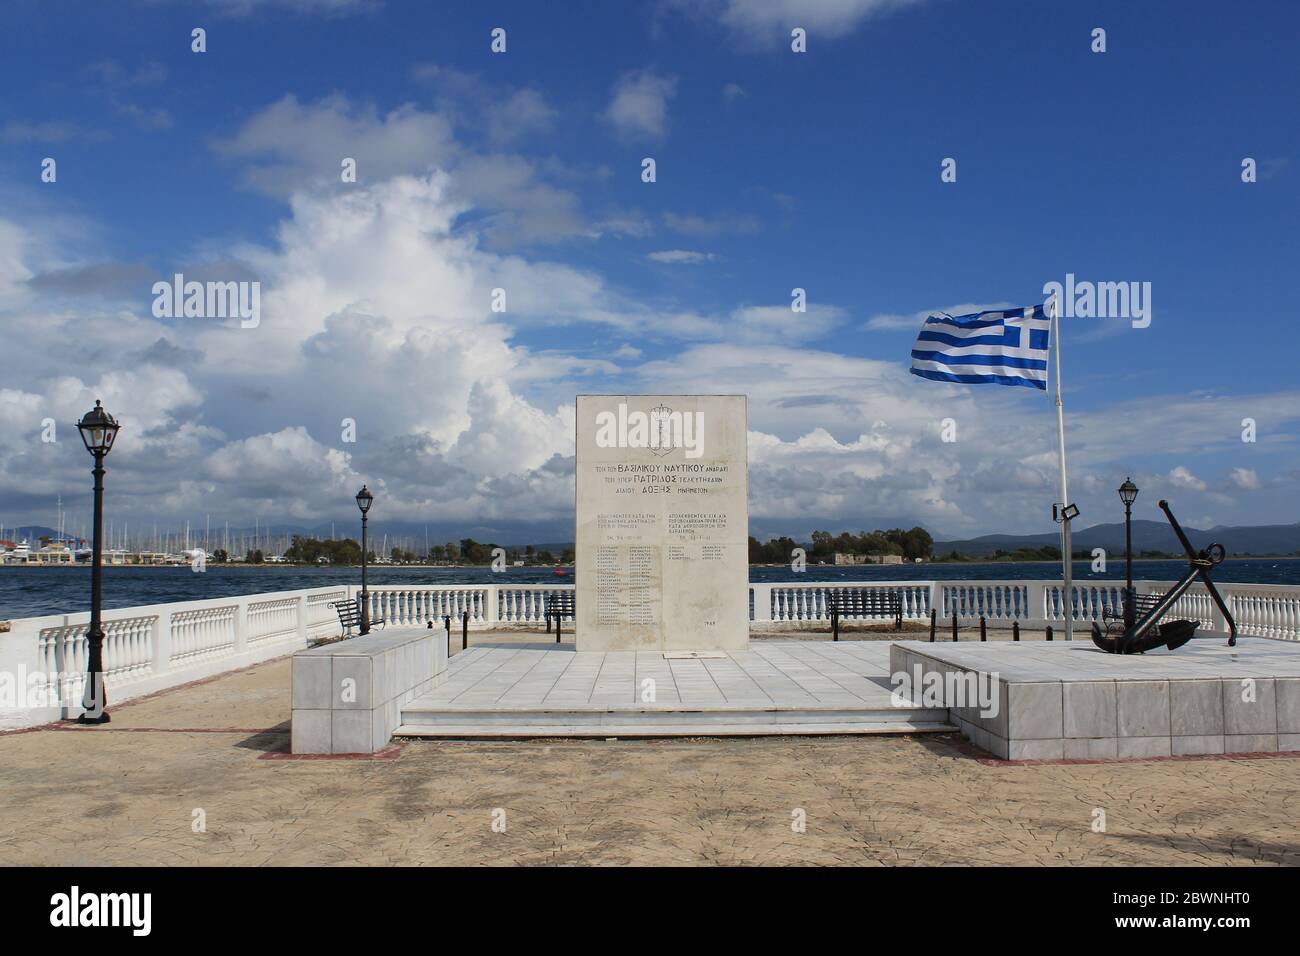 Preveza, Epirus / Greece - 05/21/2020: Sailors monument in Preveza, Greece. Sof focus view at the background of Aktio and Ambracian gulf Stock Photo